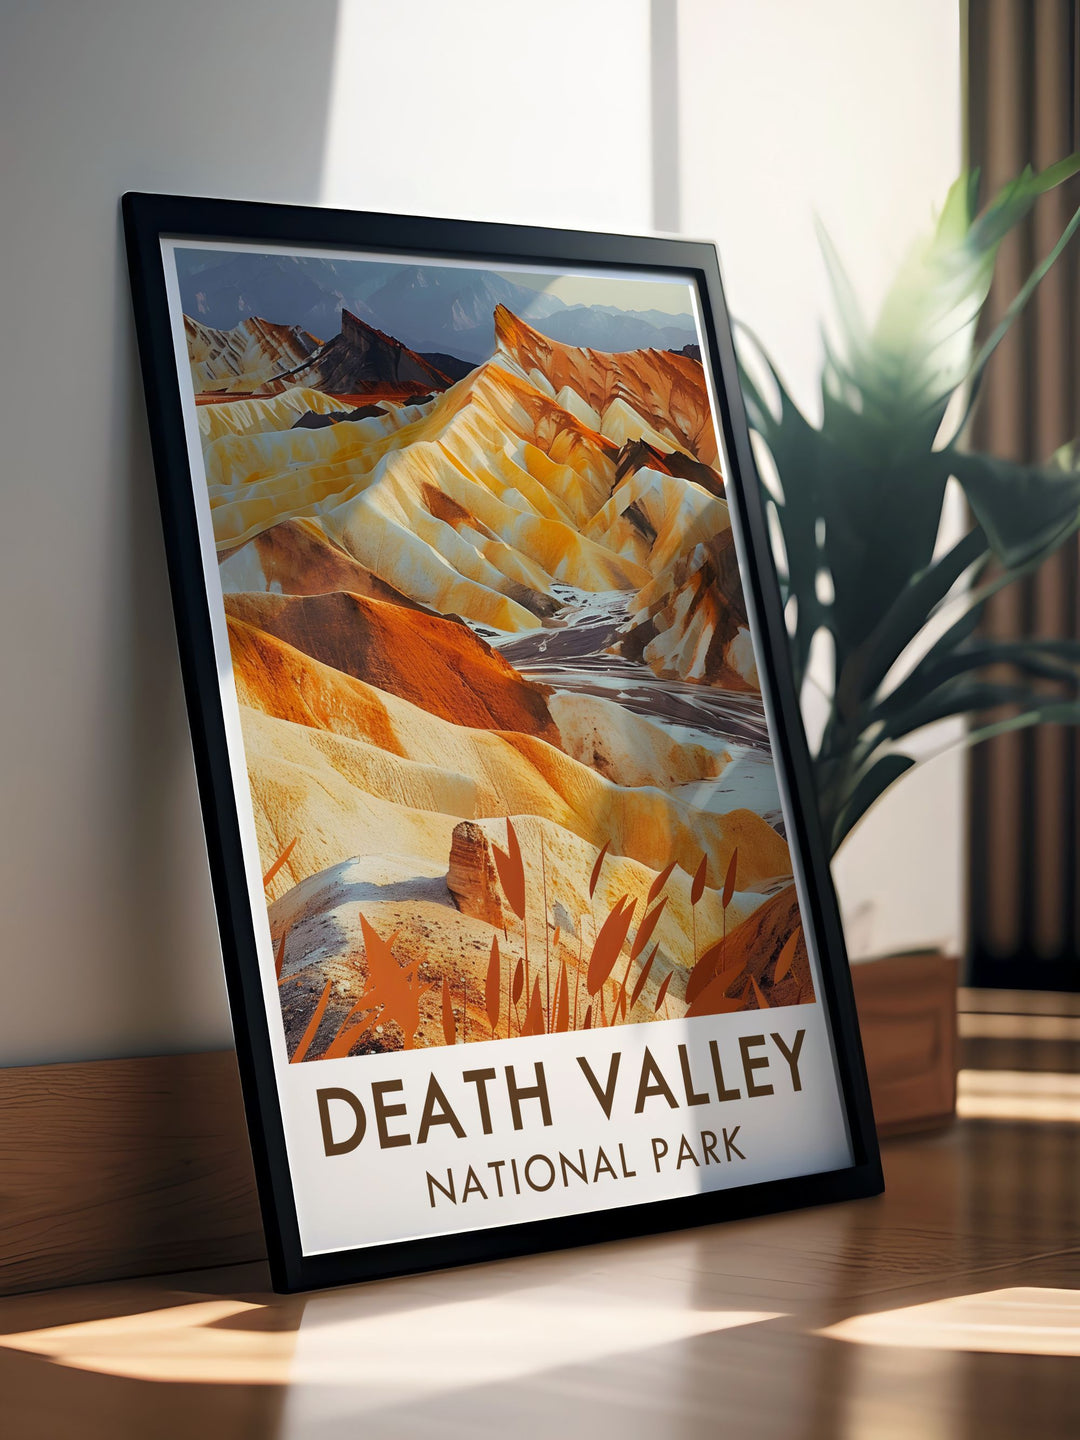 Vintage poster highlighting the stark beauty of Death Valleys desert landscape, featuring the parks iconic views from Zabriskie Point and the rugged badlands.